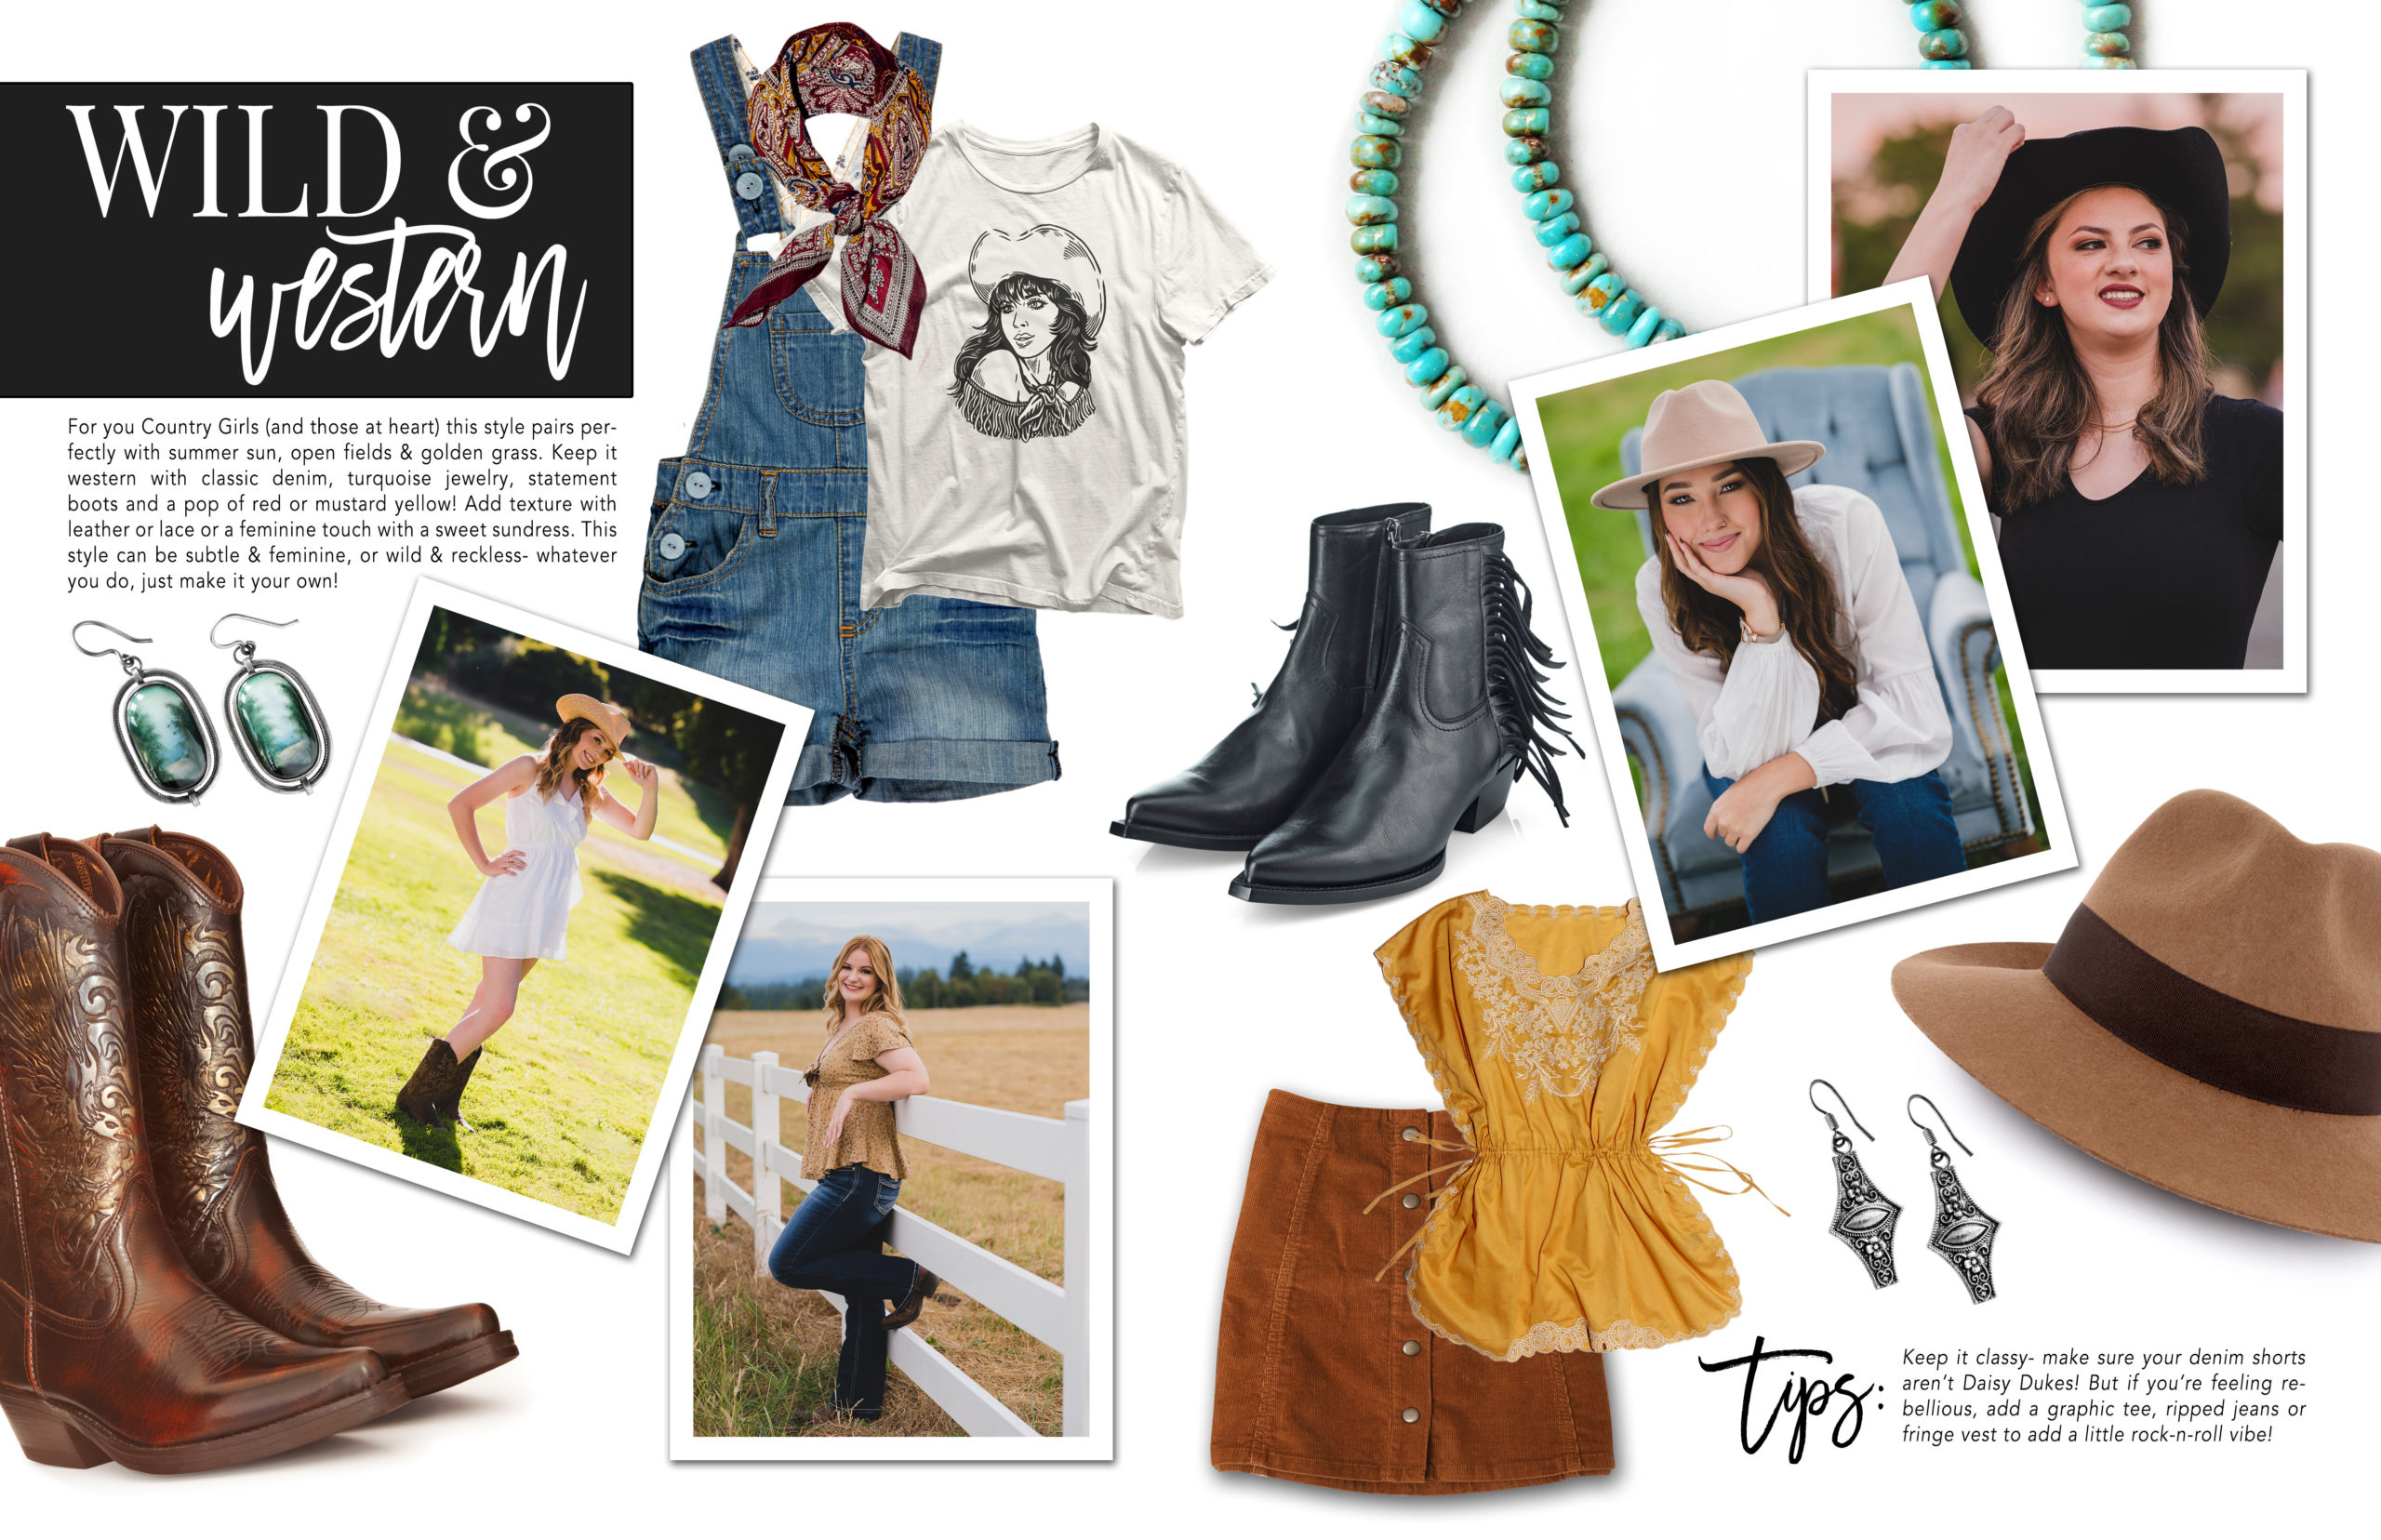 Wild and Western Senior Portrait Outfit Guide | Country Summer Outfits, Statement Boots and Leather Texture, Bright Red and Mustard Accepts | Photographed by the Best Tacoma Senior Photographer Amanda Howse Photography